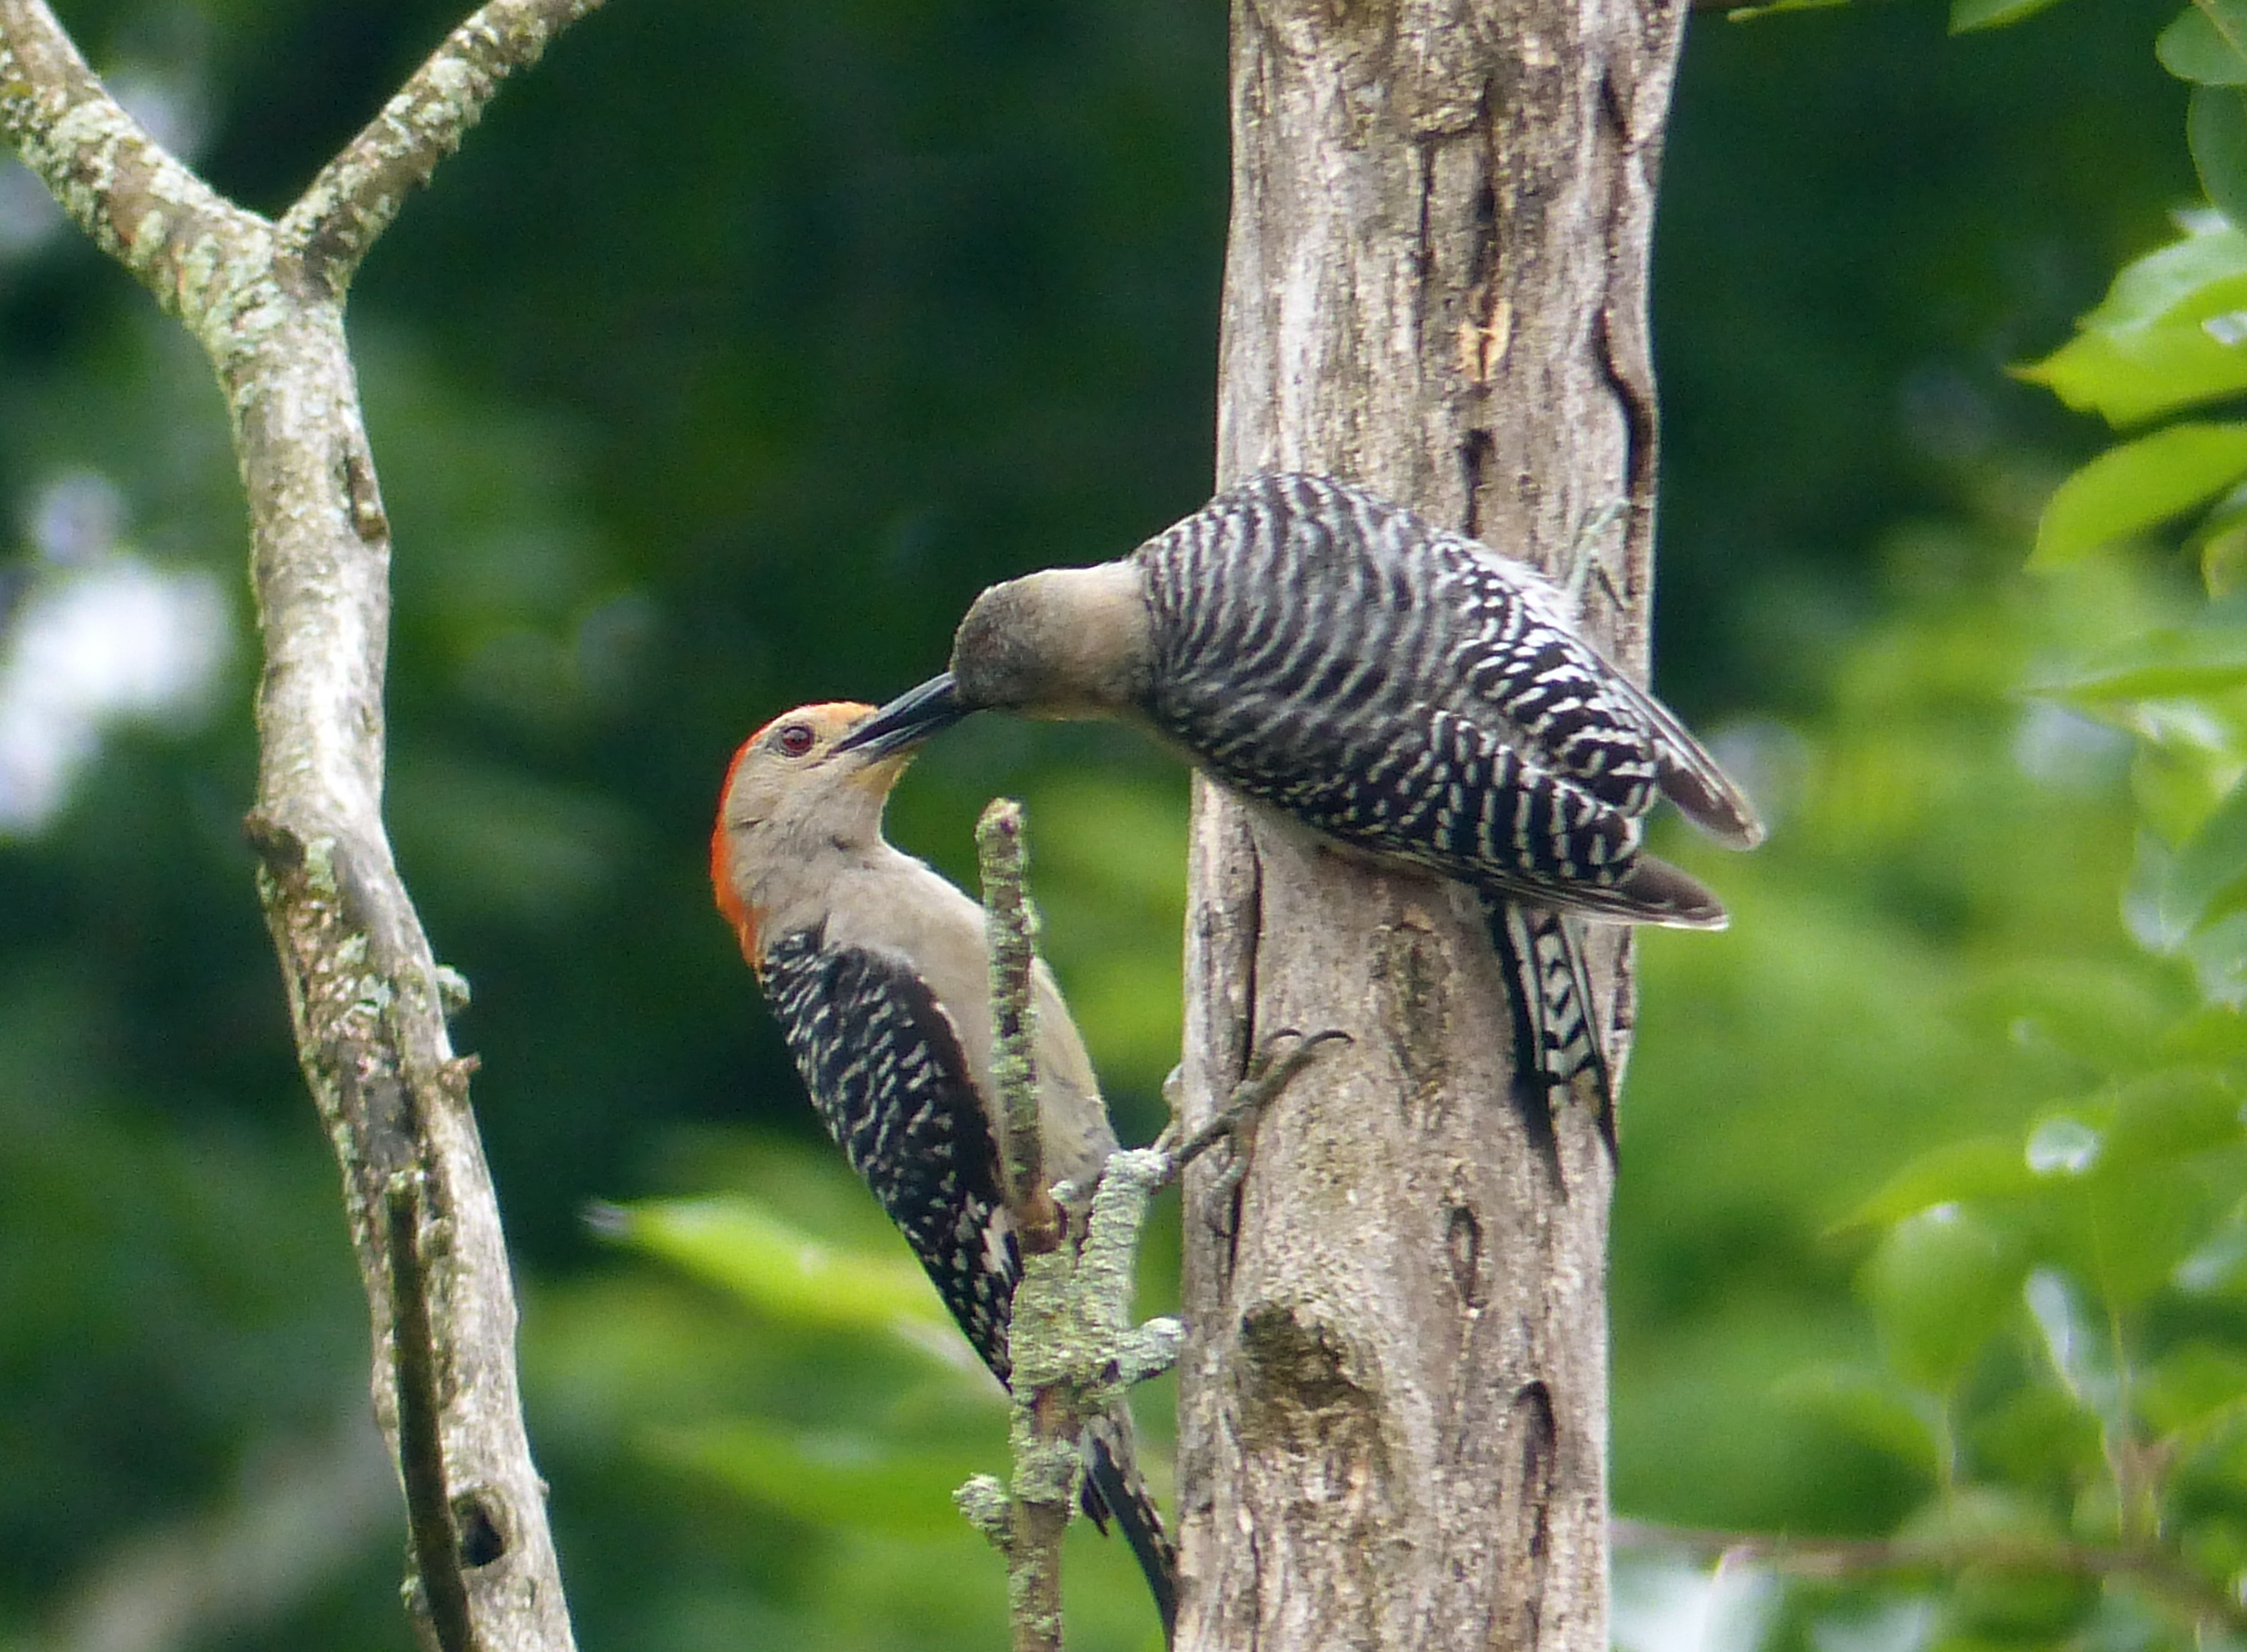 The Hairy Woodpeckers feed their young.